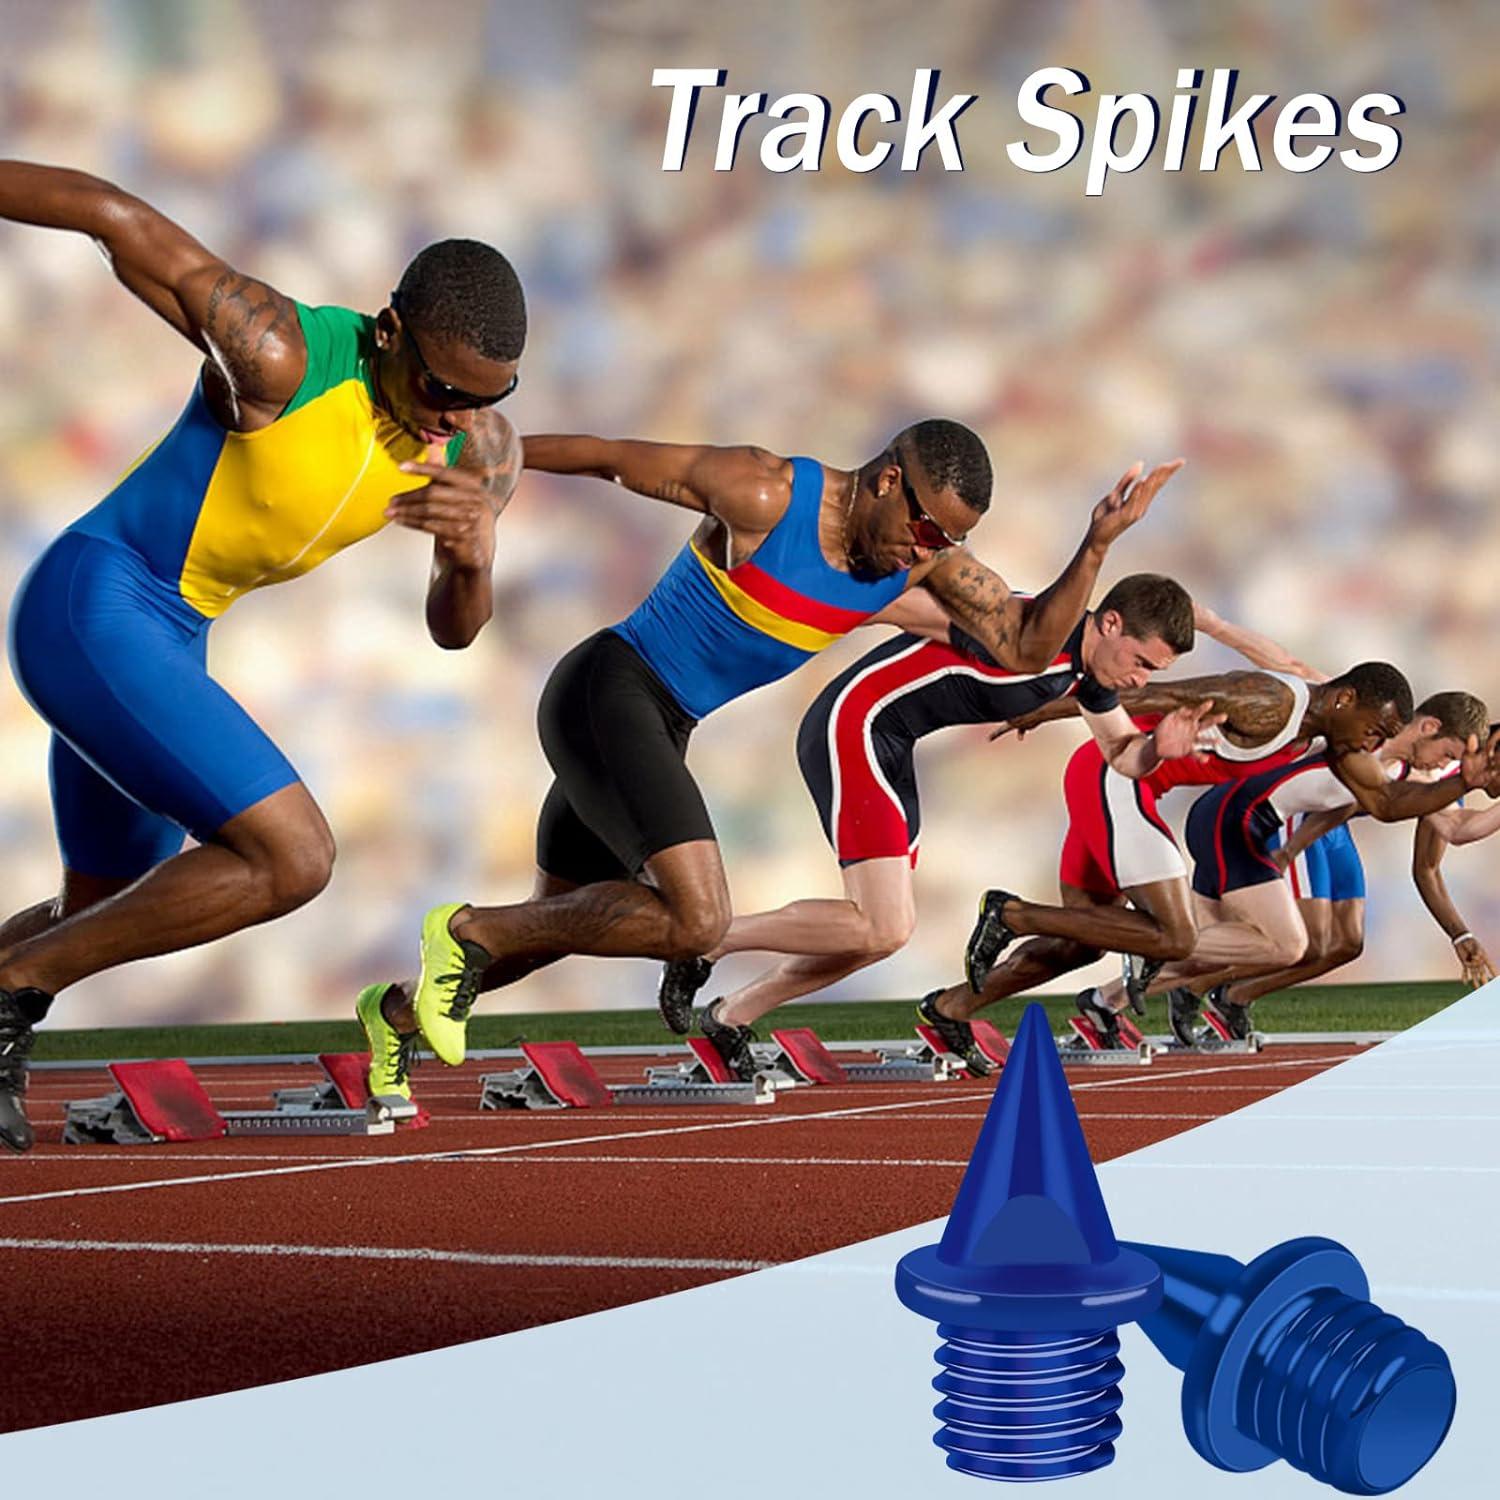 Track Spikes